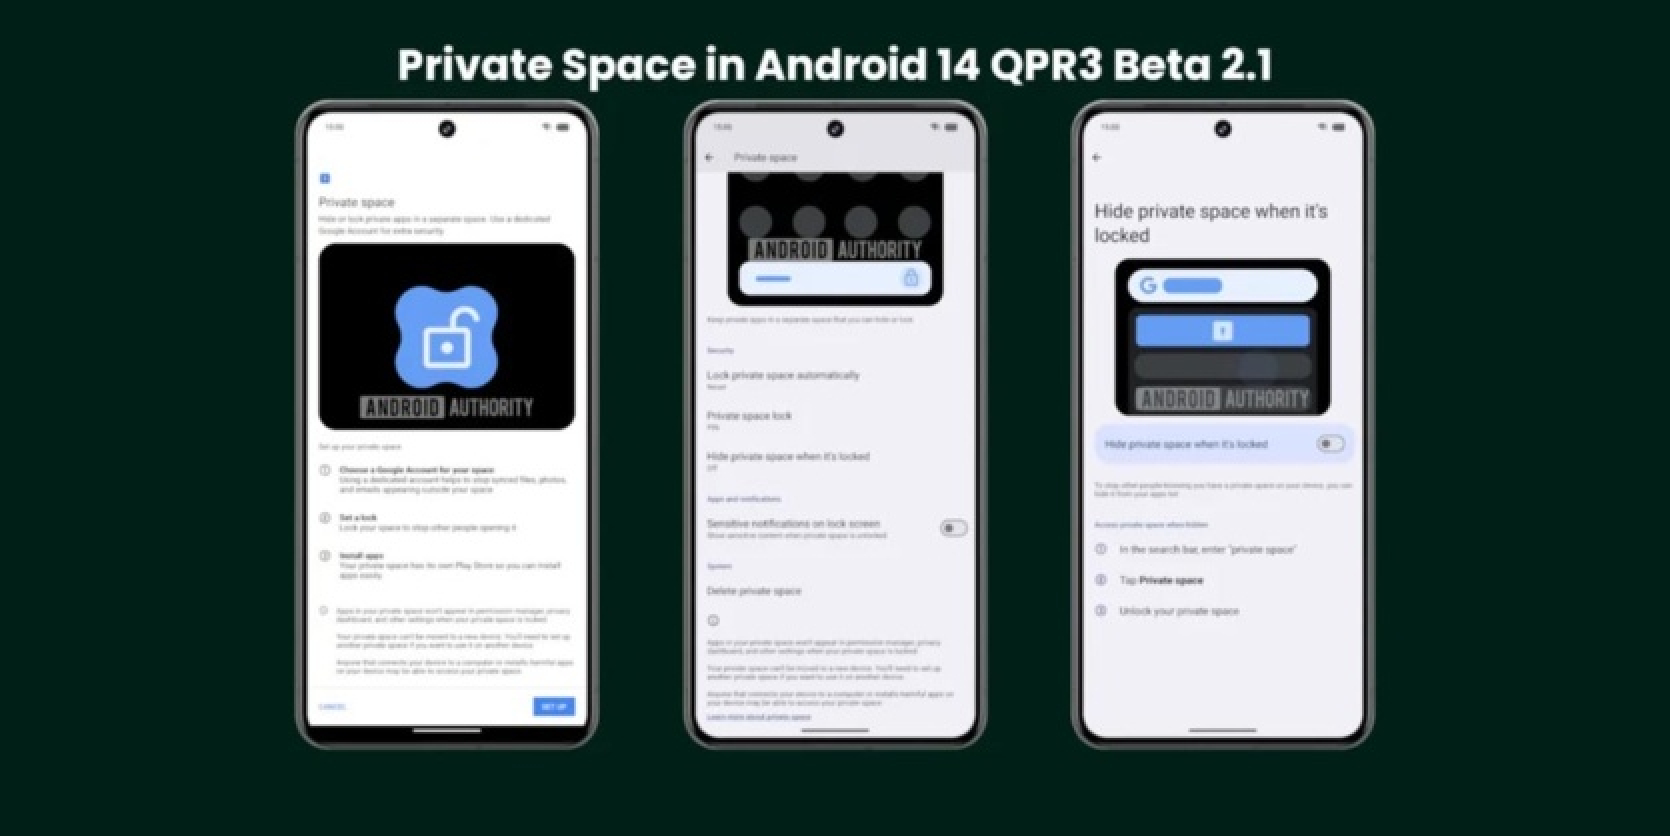 Android 15 will introduce a Private Space feature in Android 15 - analogous to Samsung's "secure folder" feature. Here's how it works